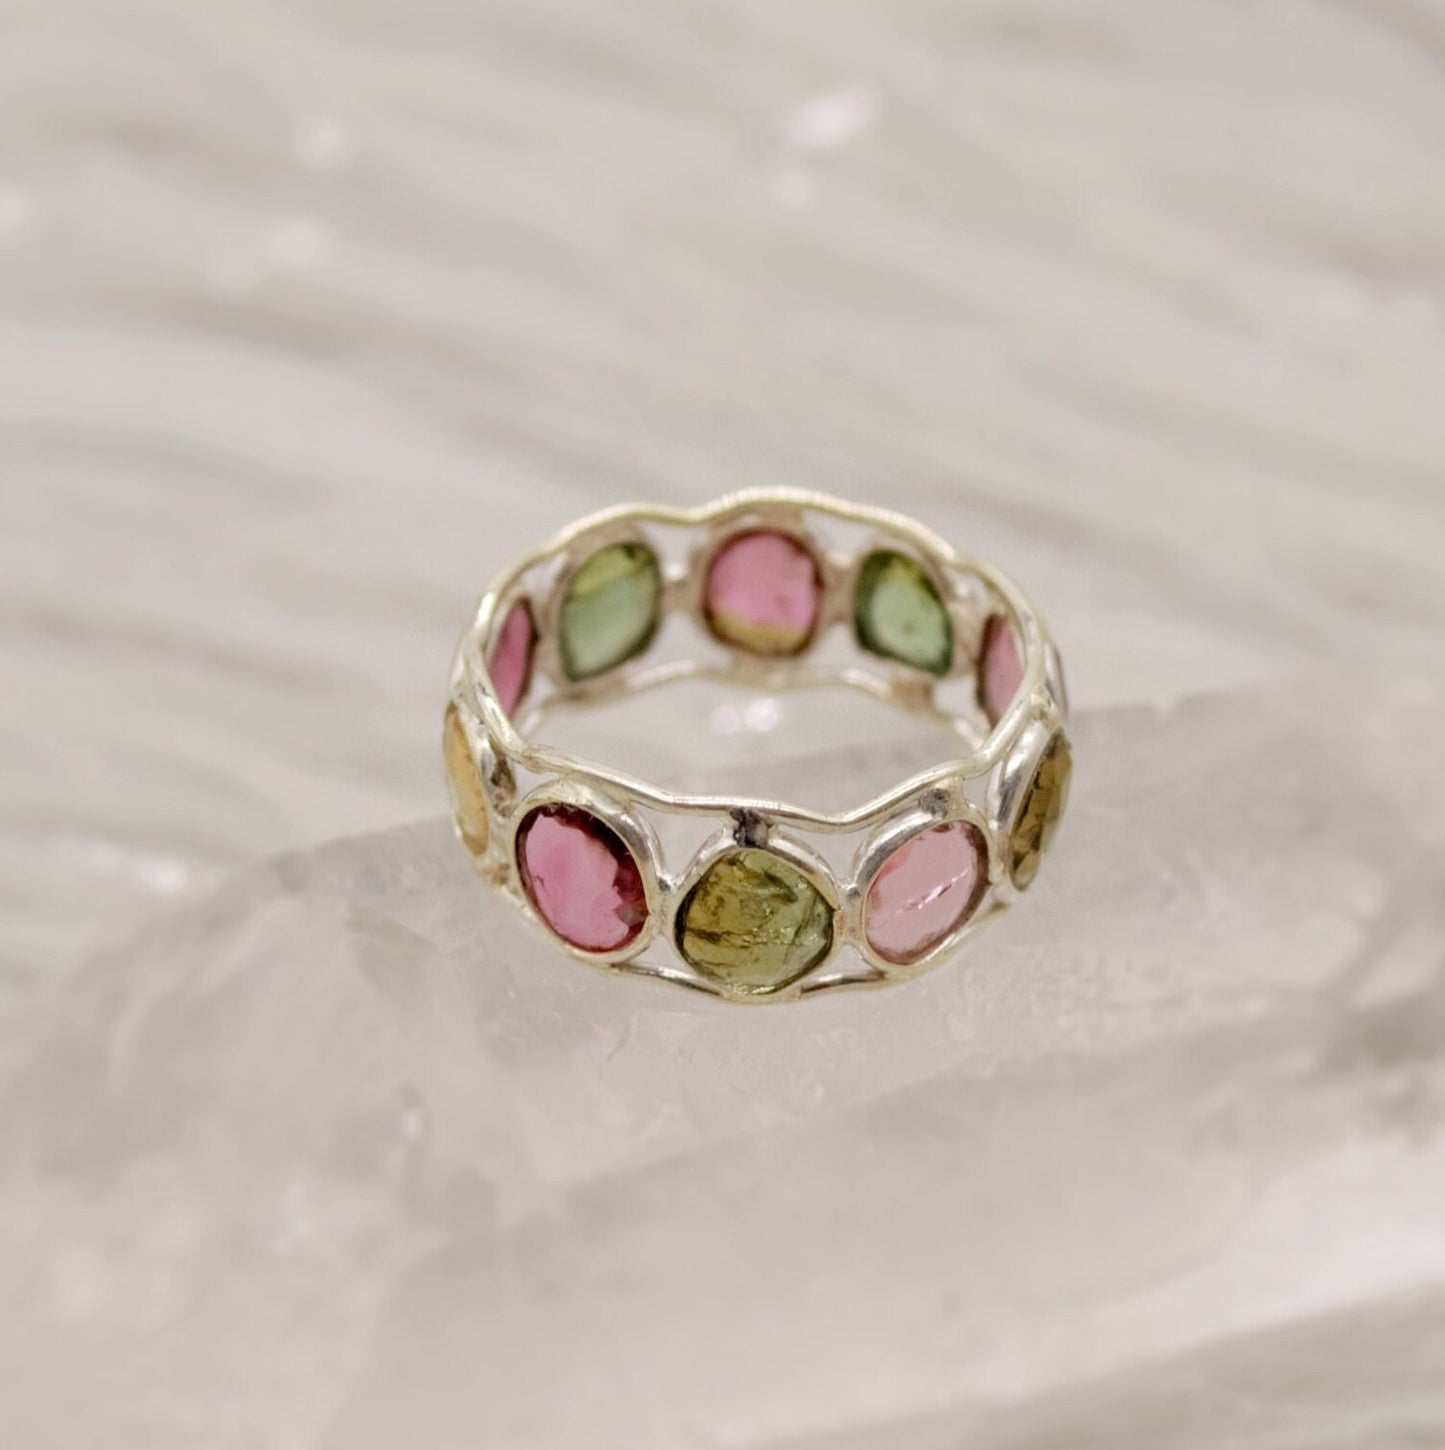 Tourmaline Ring, Stacking Silver Ring, Raw Gem Ring, Green, Pink Tourmaline Jewelry, Rings for Women, October Birthstone, Gift for Her